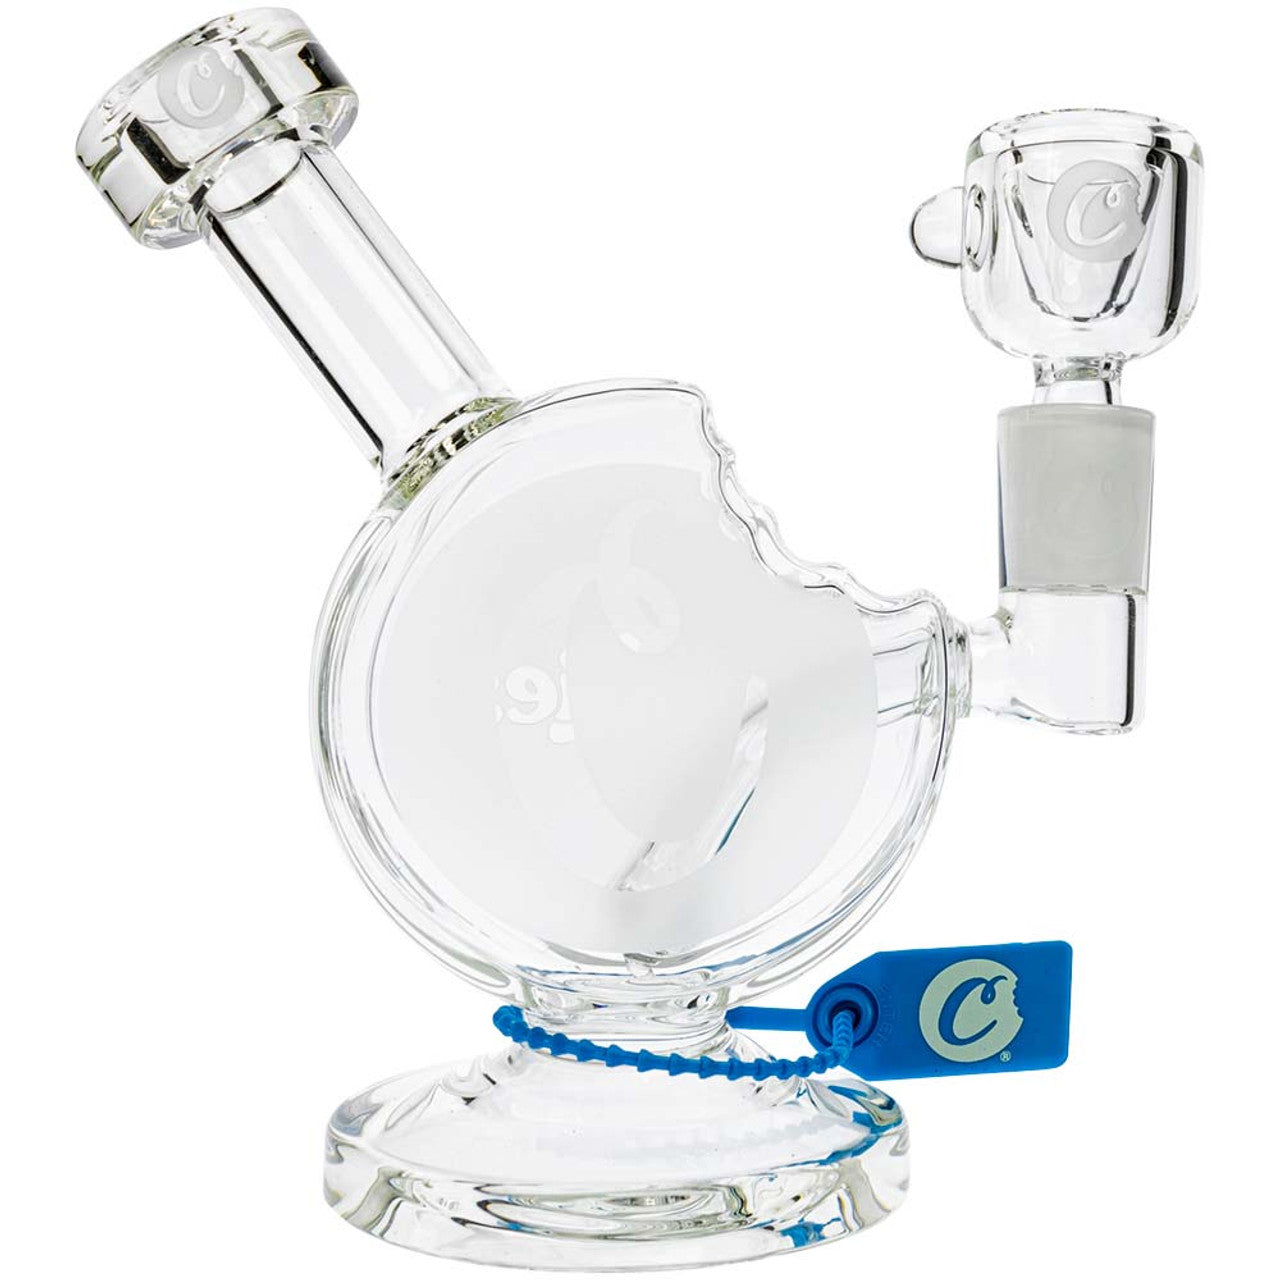 Cookies  Glass Rigs, Bongs, Pipes, & Accessories